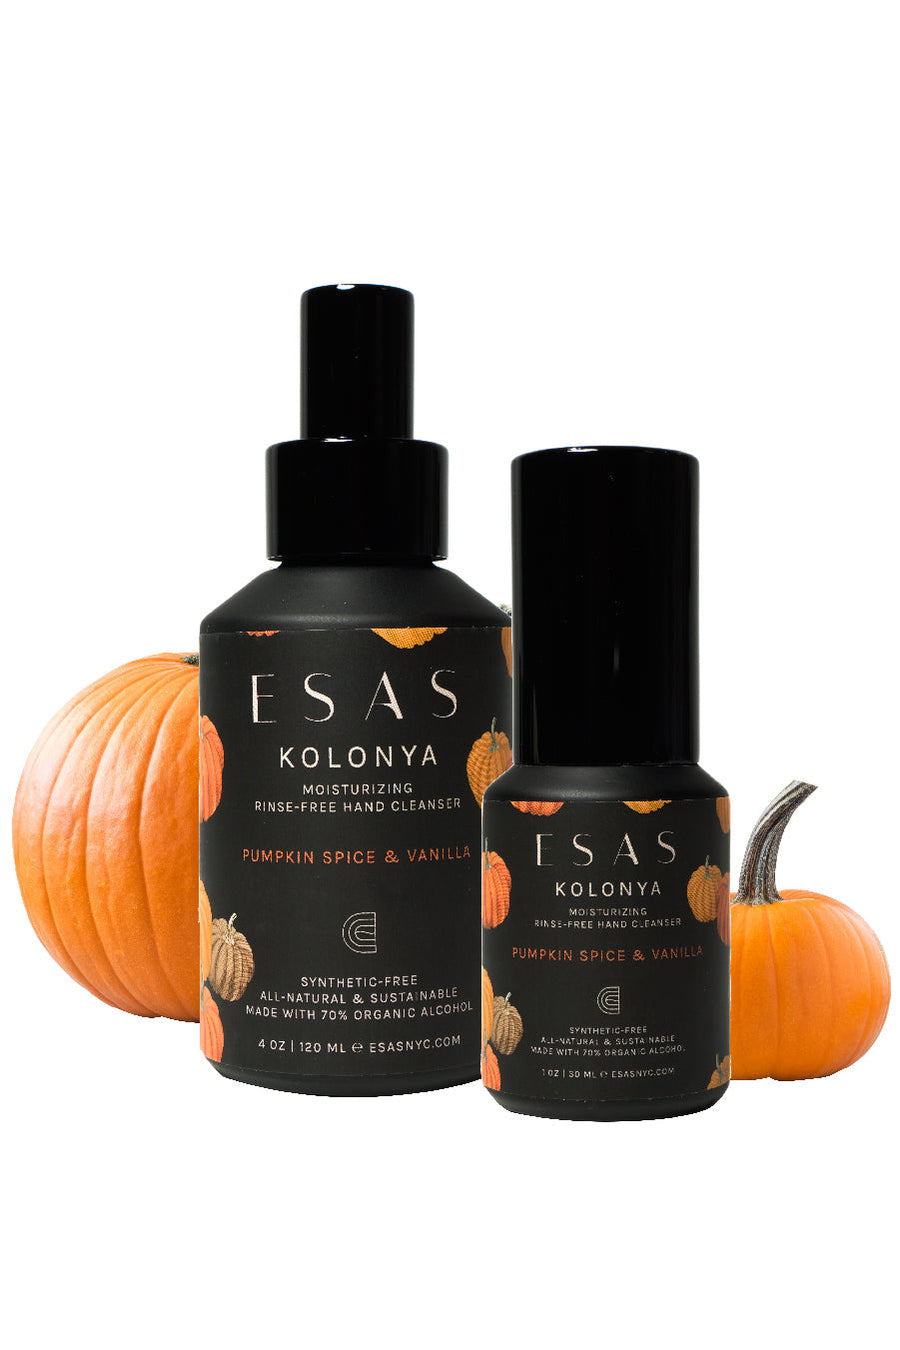 Pumpkin Spice & Vanilla Kolonya Hand Cleanser and Candle